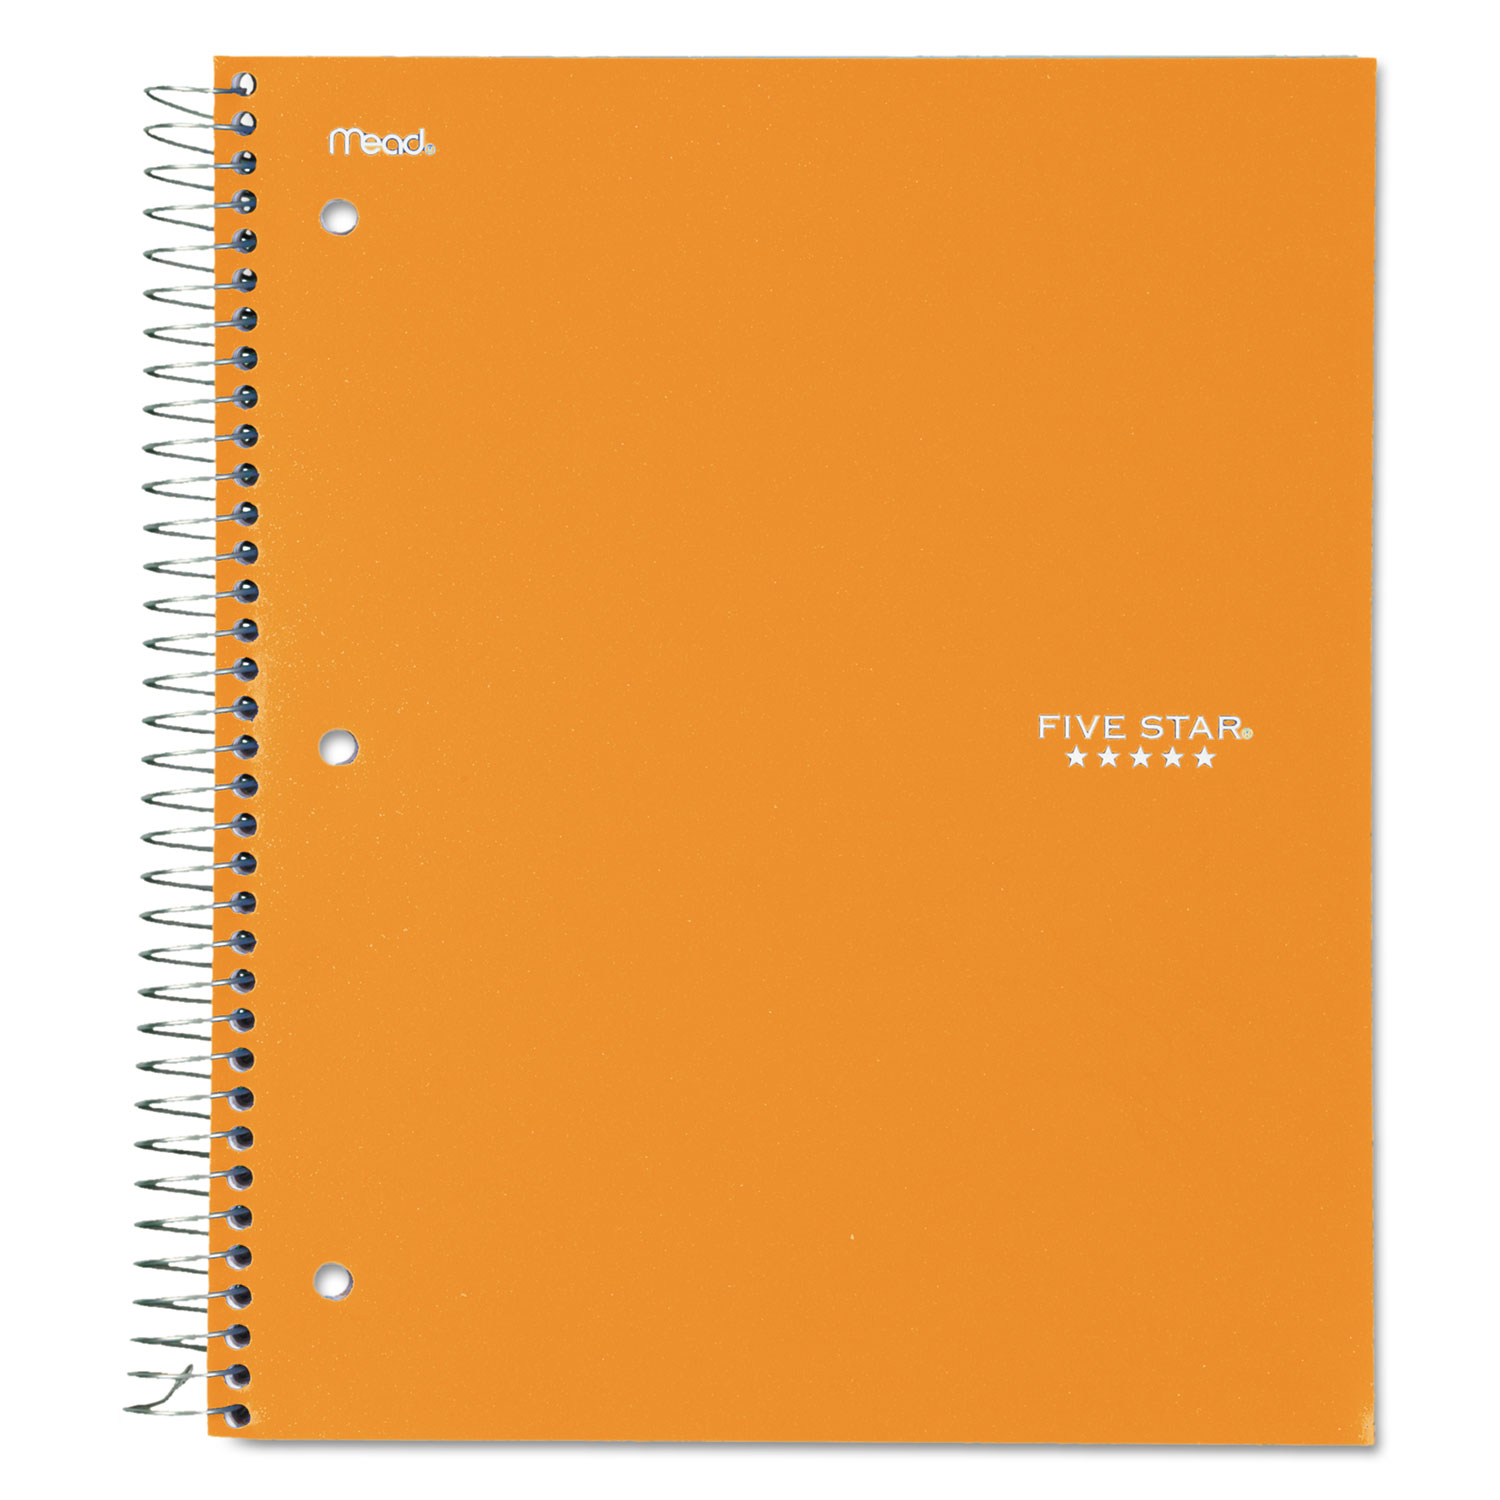  Five Star 06050 Trend Wirebound Notebook, 3 Subjects, Medium/College Rule, Assorted Color Covers, 11 x 8.5, 150 Sheets (MEA06050) 